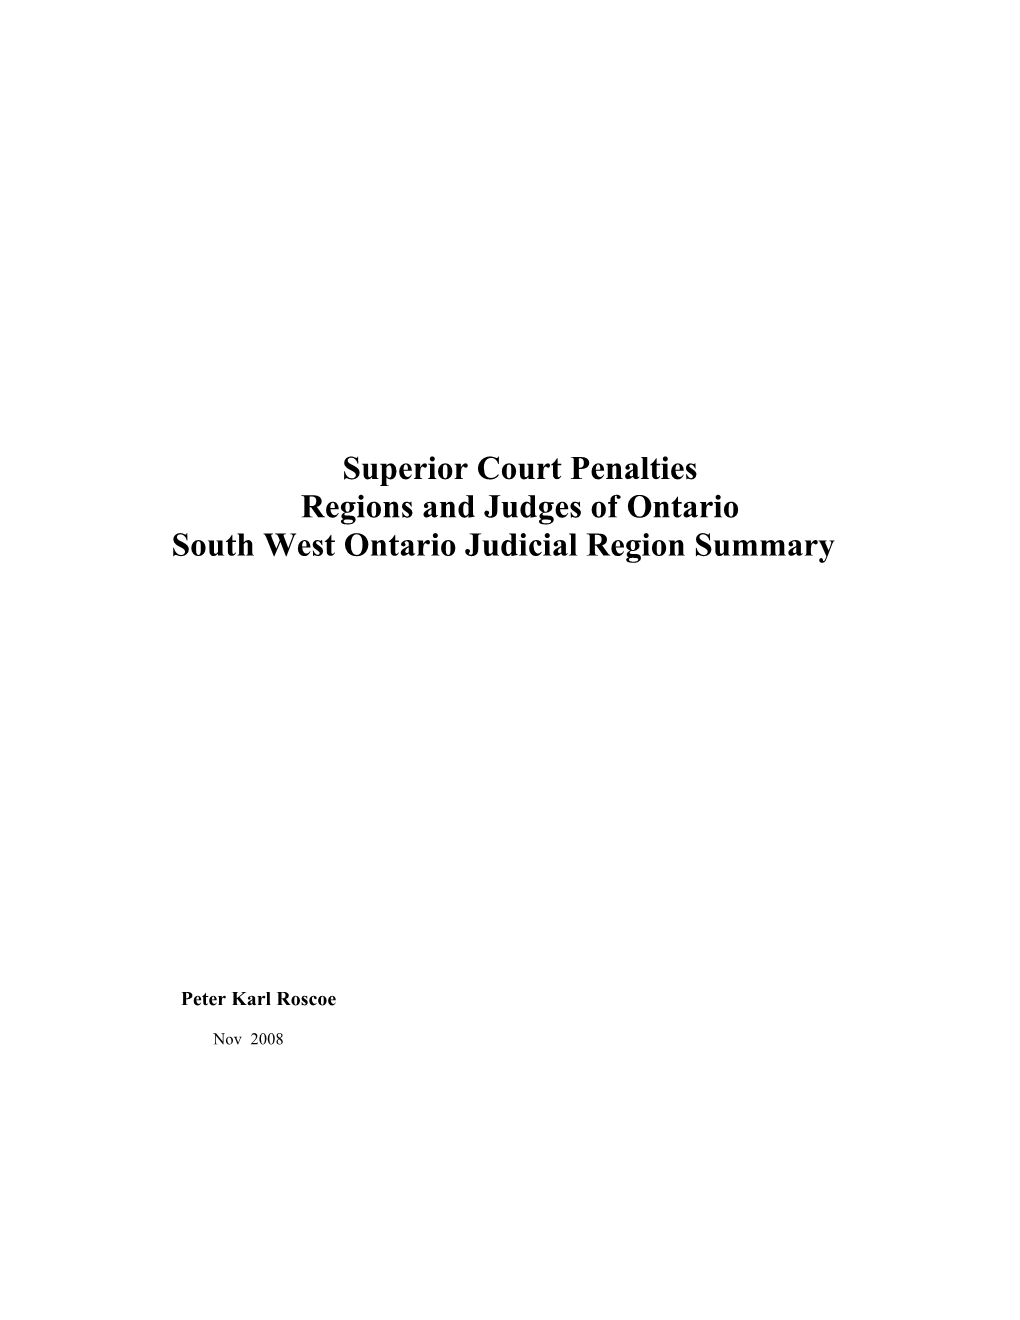 South West Region Penalties and Cost Penalties Summary